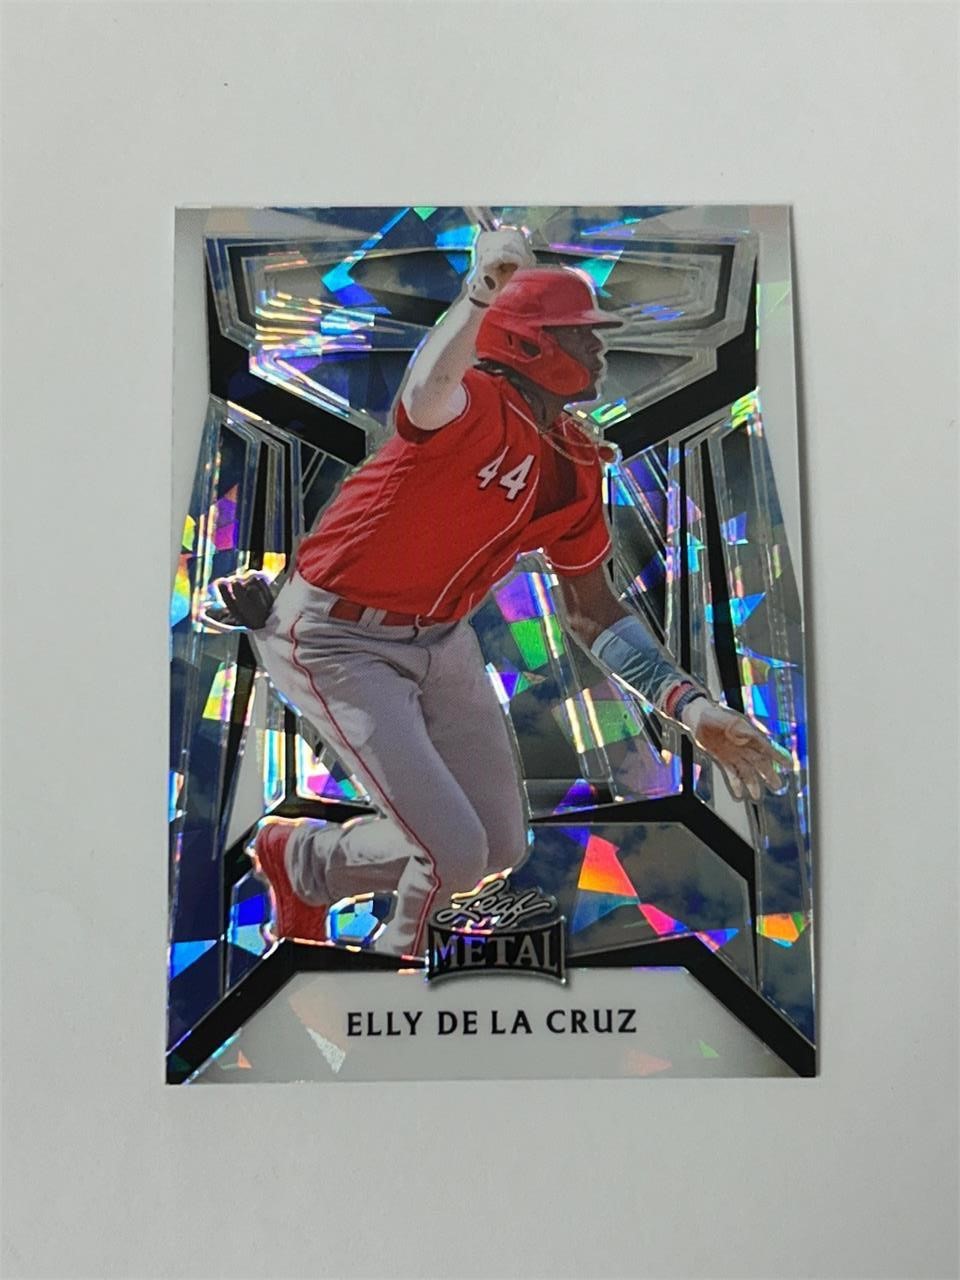 April 22nd Sports Card Auction